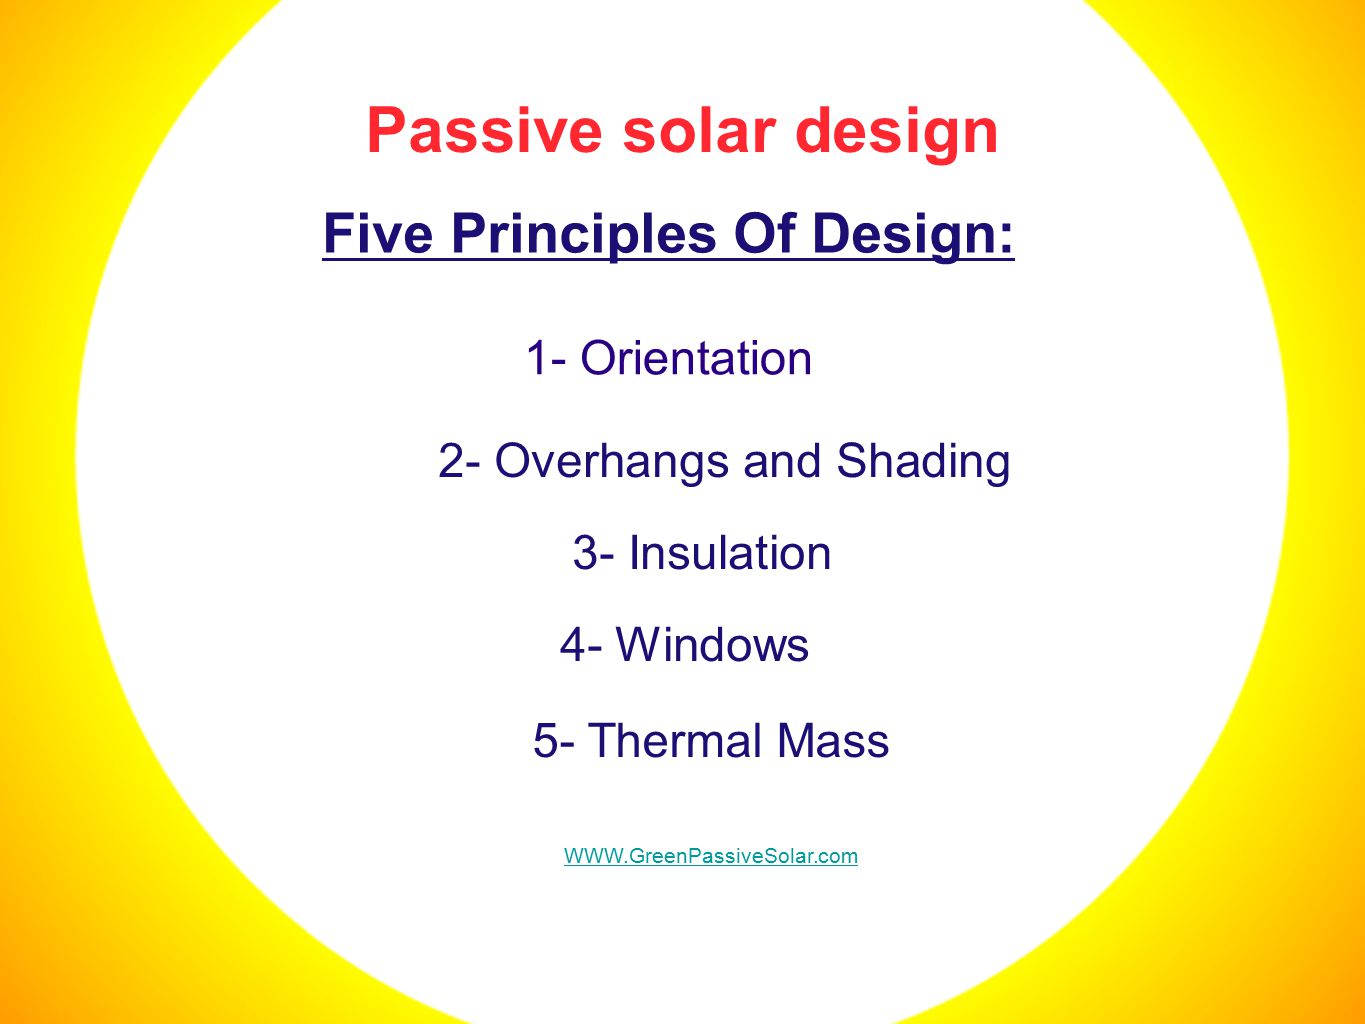 Passive solar design 2- Overhangs and Shading Five Principles Of Design: 1- Orientation 4- Windows 3- Insulation 5- Thermal Mass